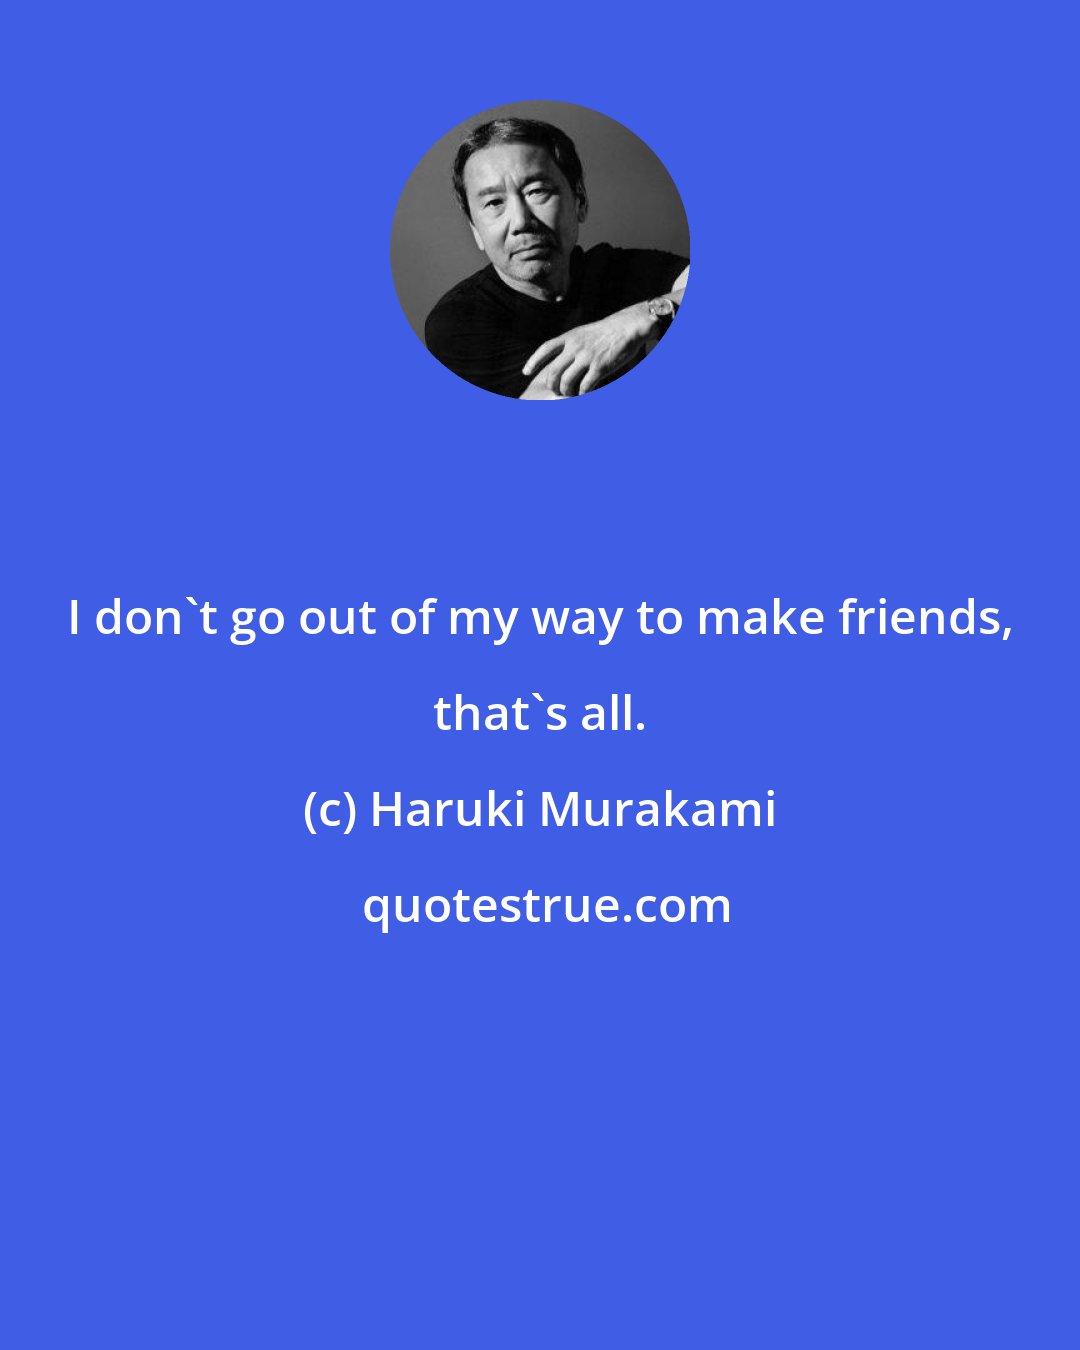 Haruki Murakami: I don't go out of my way to make friends, that's all.